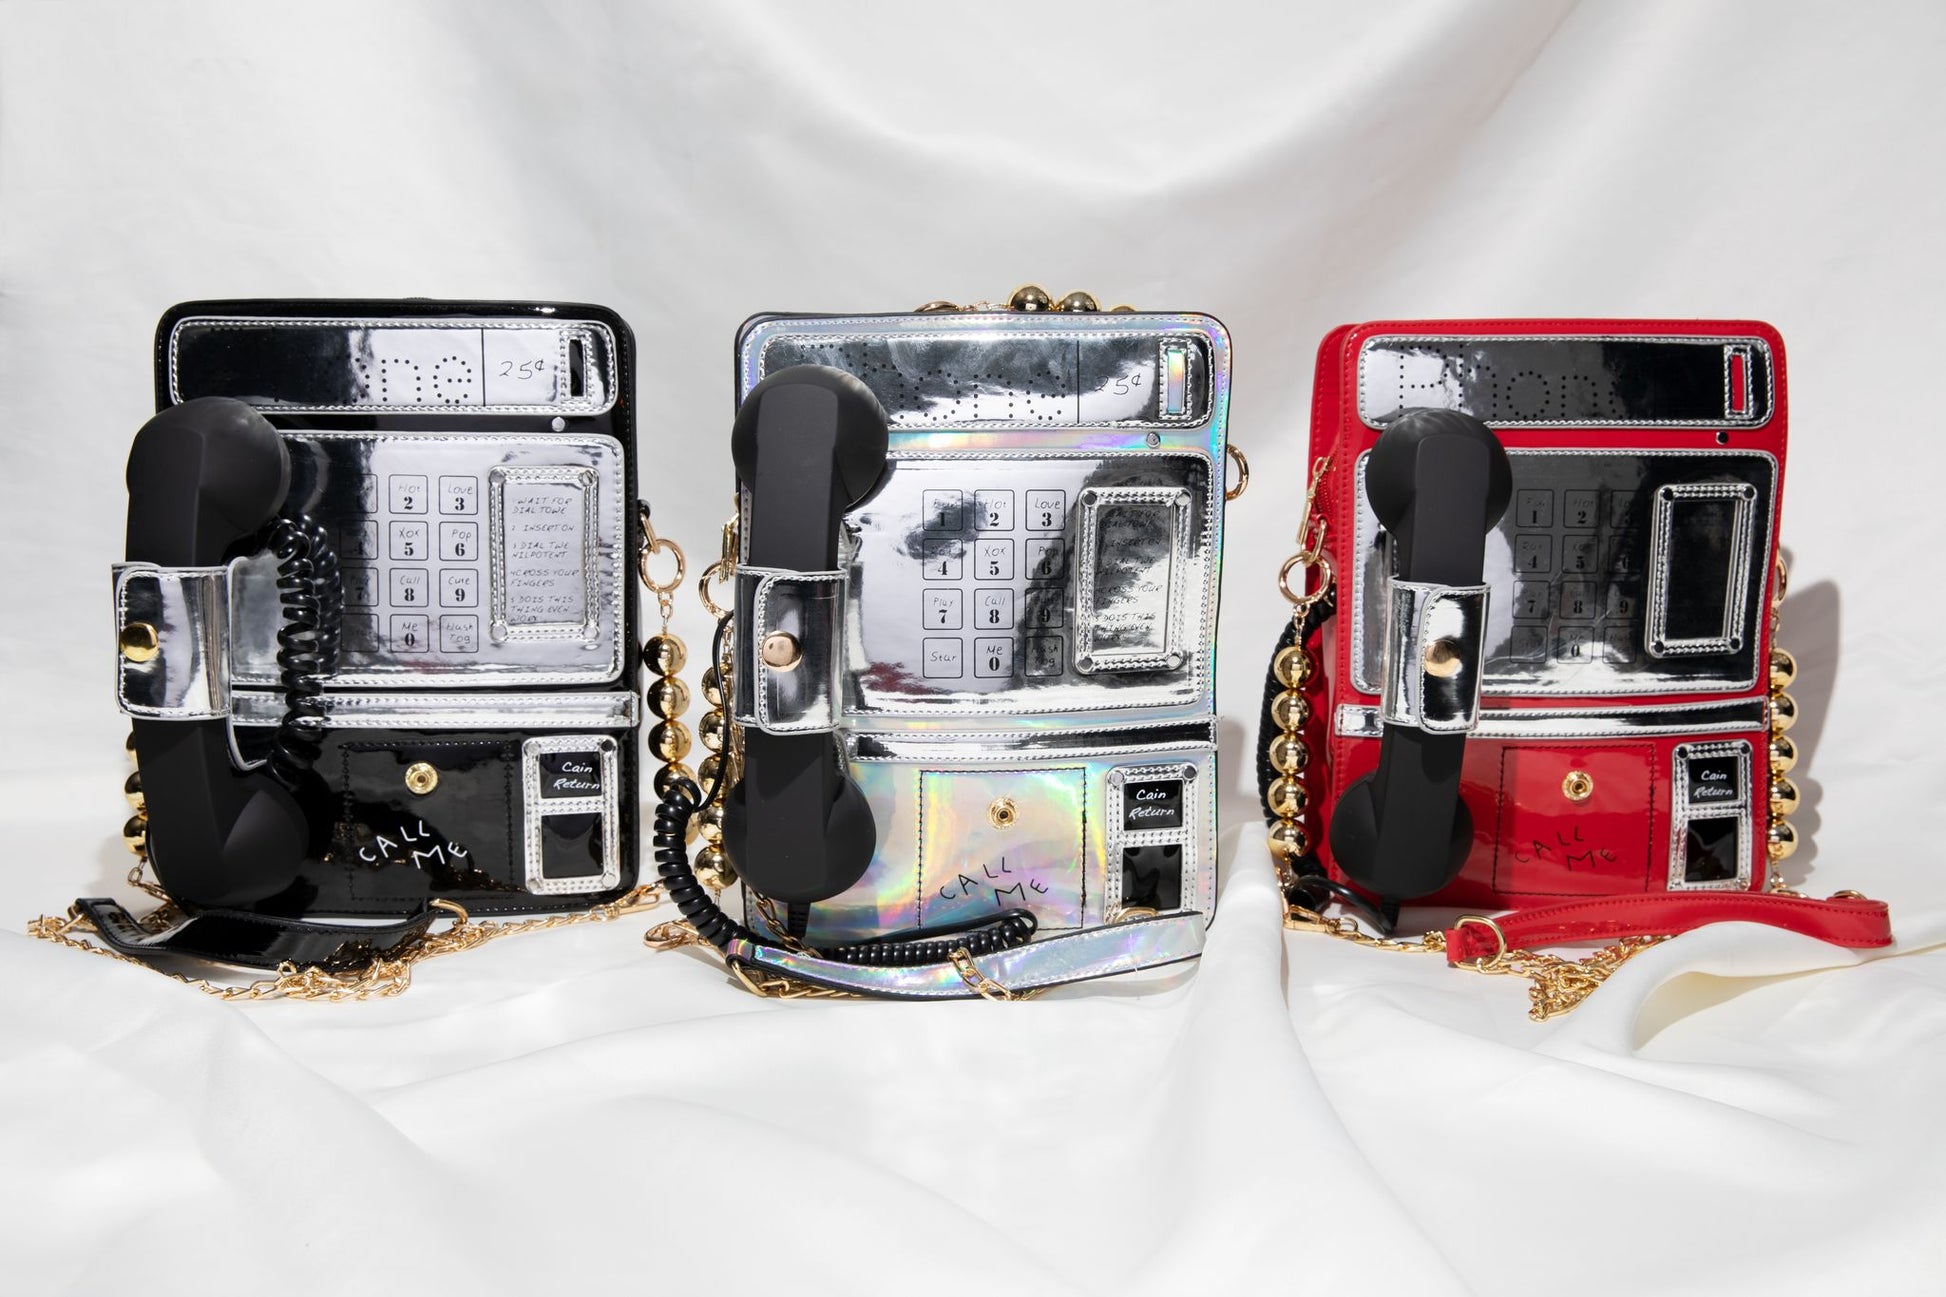 Ring! Ring! Ring! Gotta run to that Payphone before they hang up. The BBXO PEARL PAYPHONE SHOULDER BAG BLACK has a real phone receiver that you can make and take calls on! Styling options include Shoulder bag, Crossbody, Slingbag - it's totally up to your own interpretation.